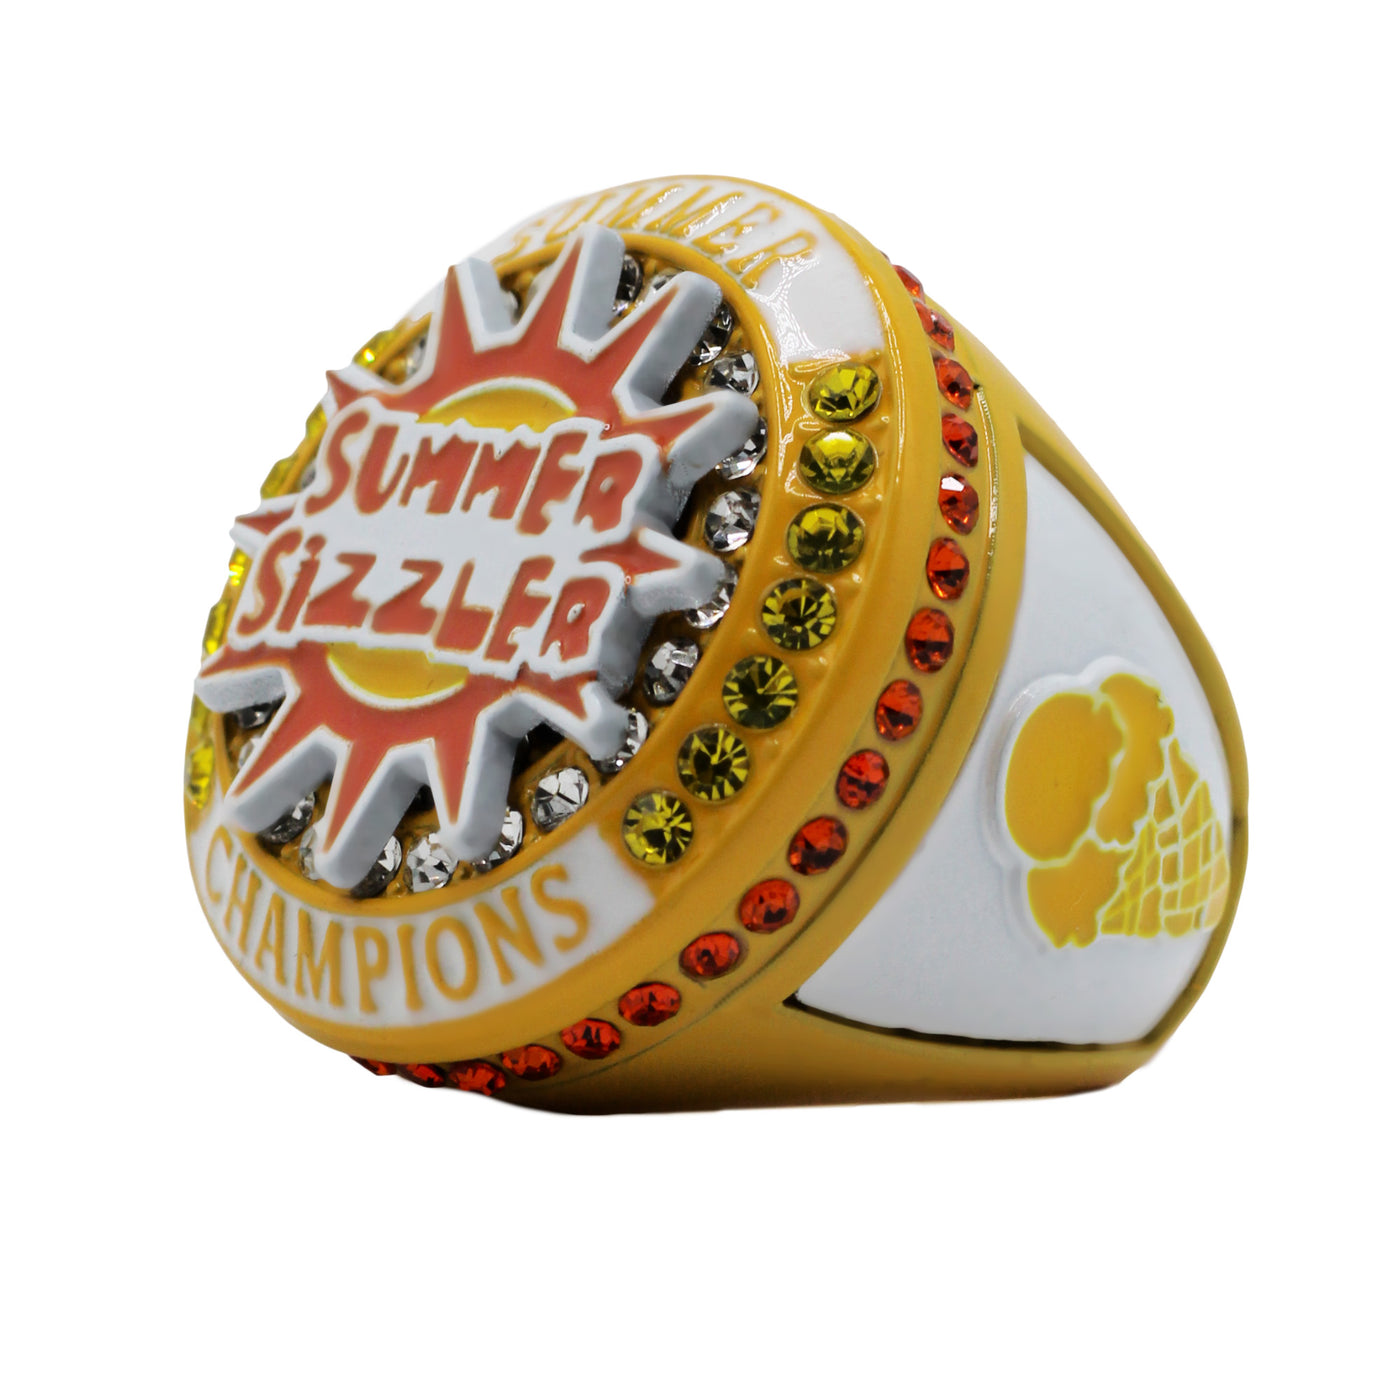 SUMMER SIZZLER CHAMPIONS RING